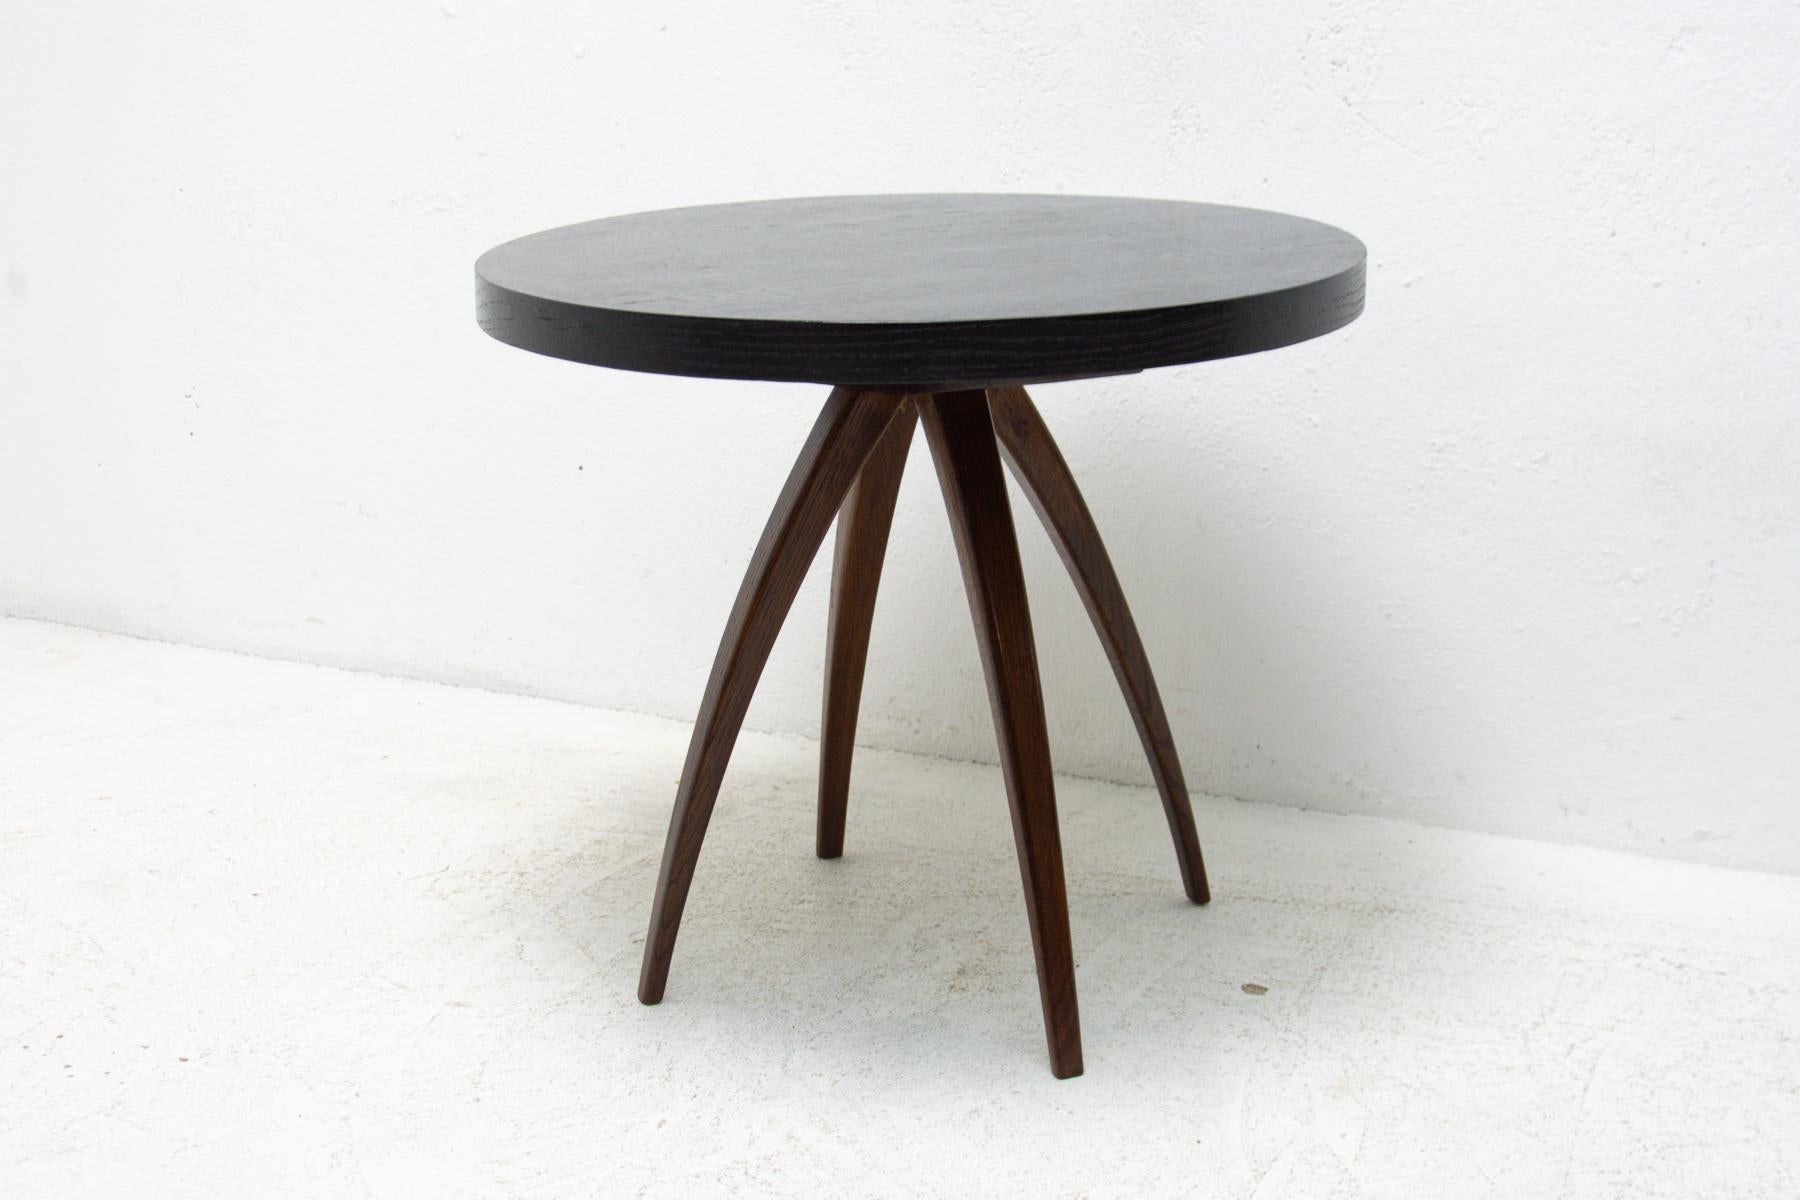 Modernist table in the shape of a spider, it was designed by Czechoslovak architect Josef Pehr. Made to order for functionalist villa in Prague in the 1940s.
Oak veneer.
The table was renovated and is fully functional in excellent condition.
 